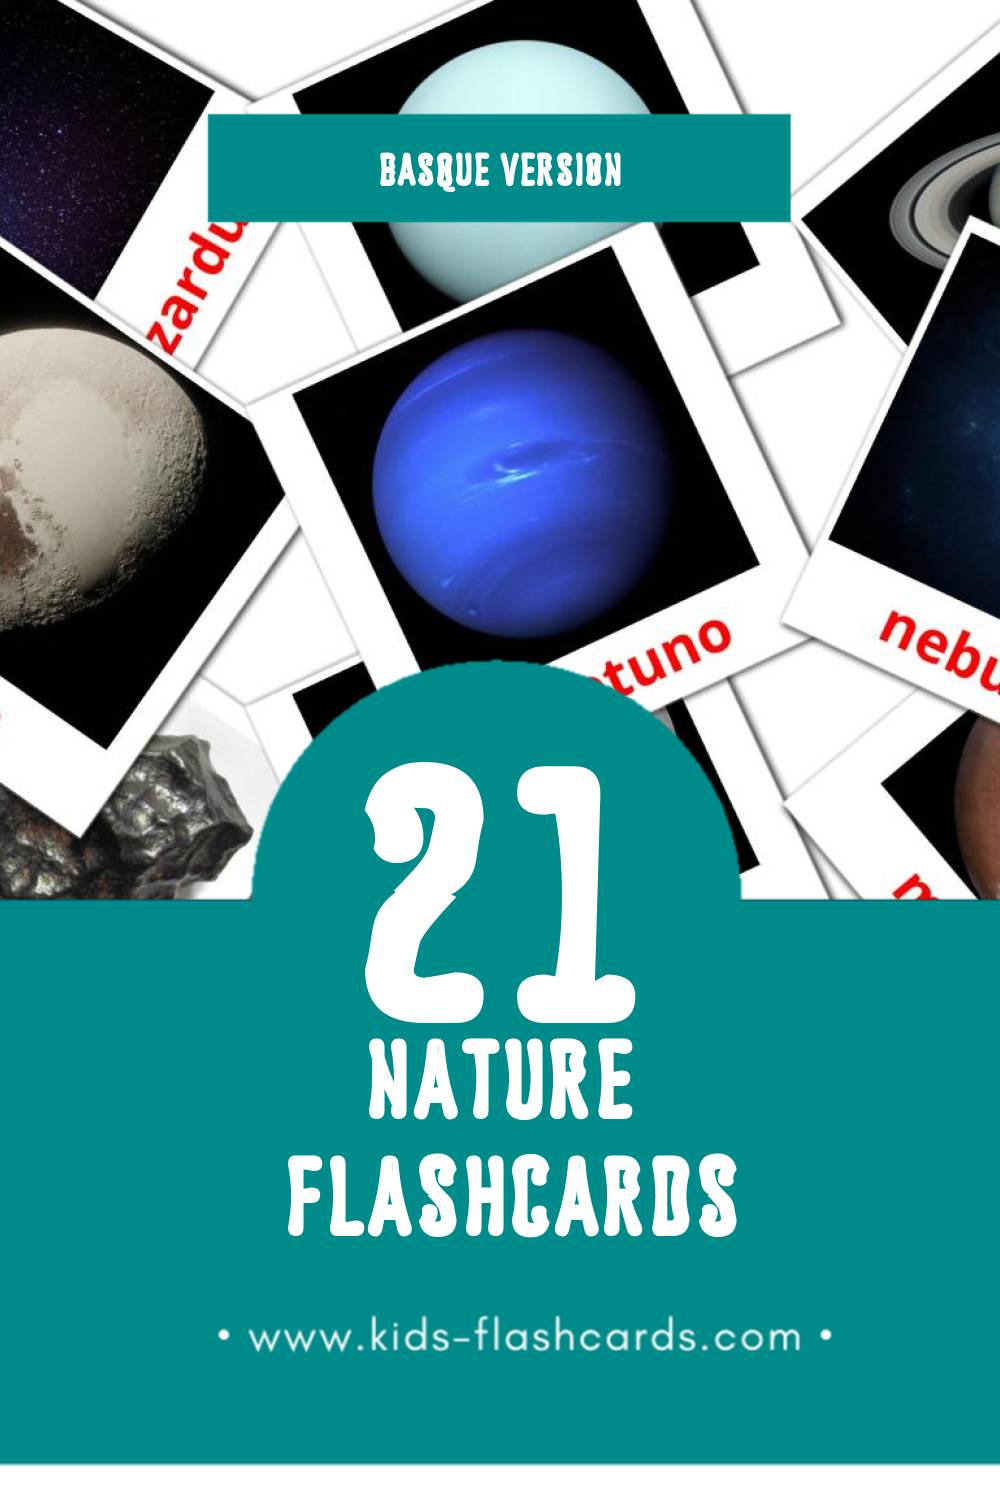 Visual natura Flashcards for Toddlers (21 cards in Basque)